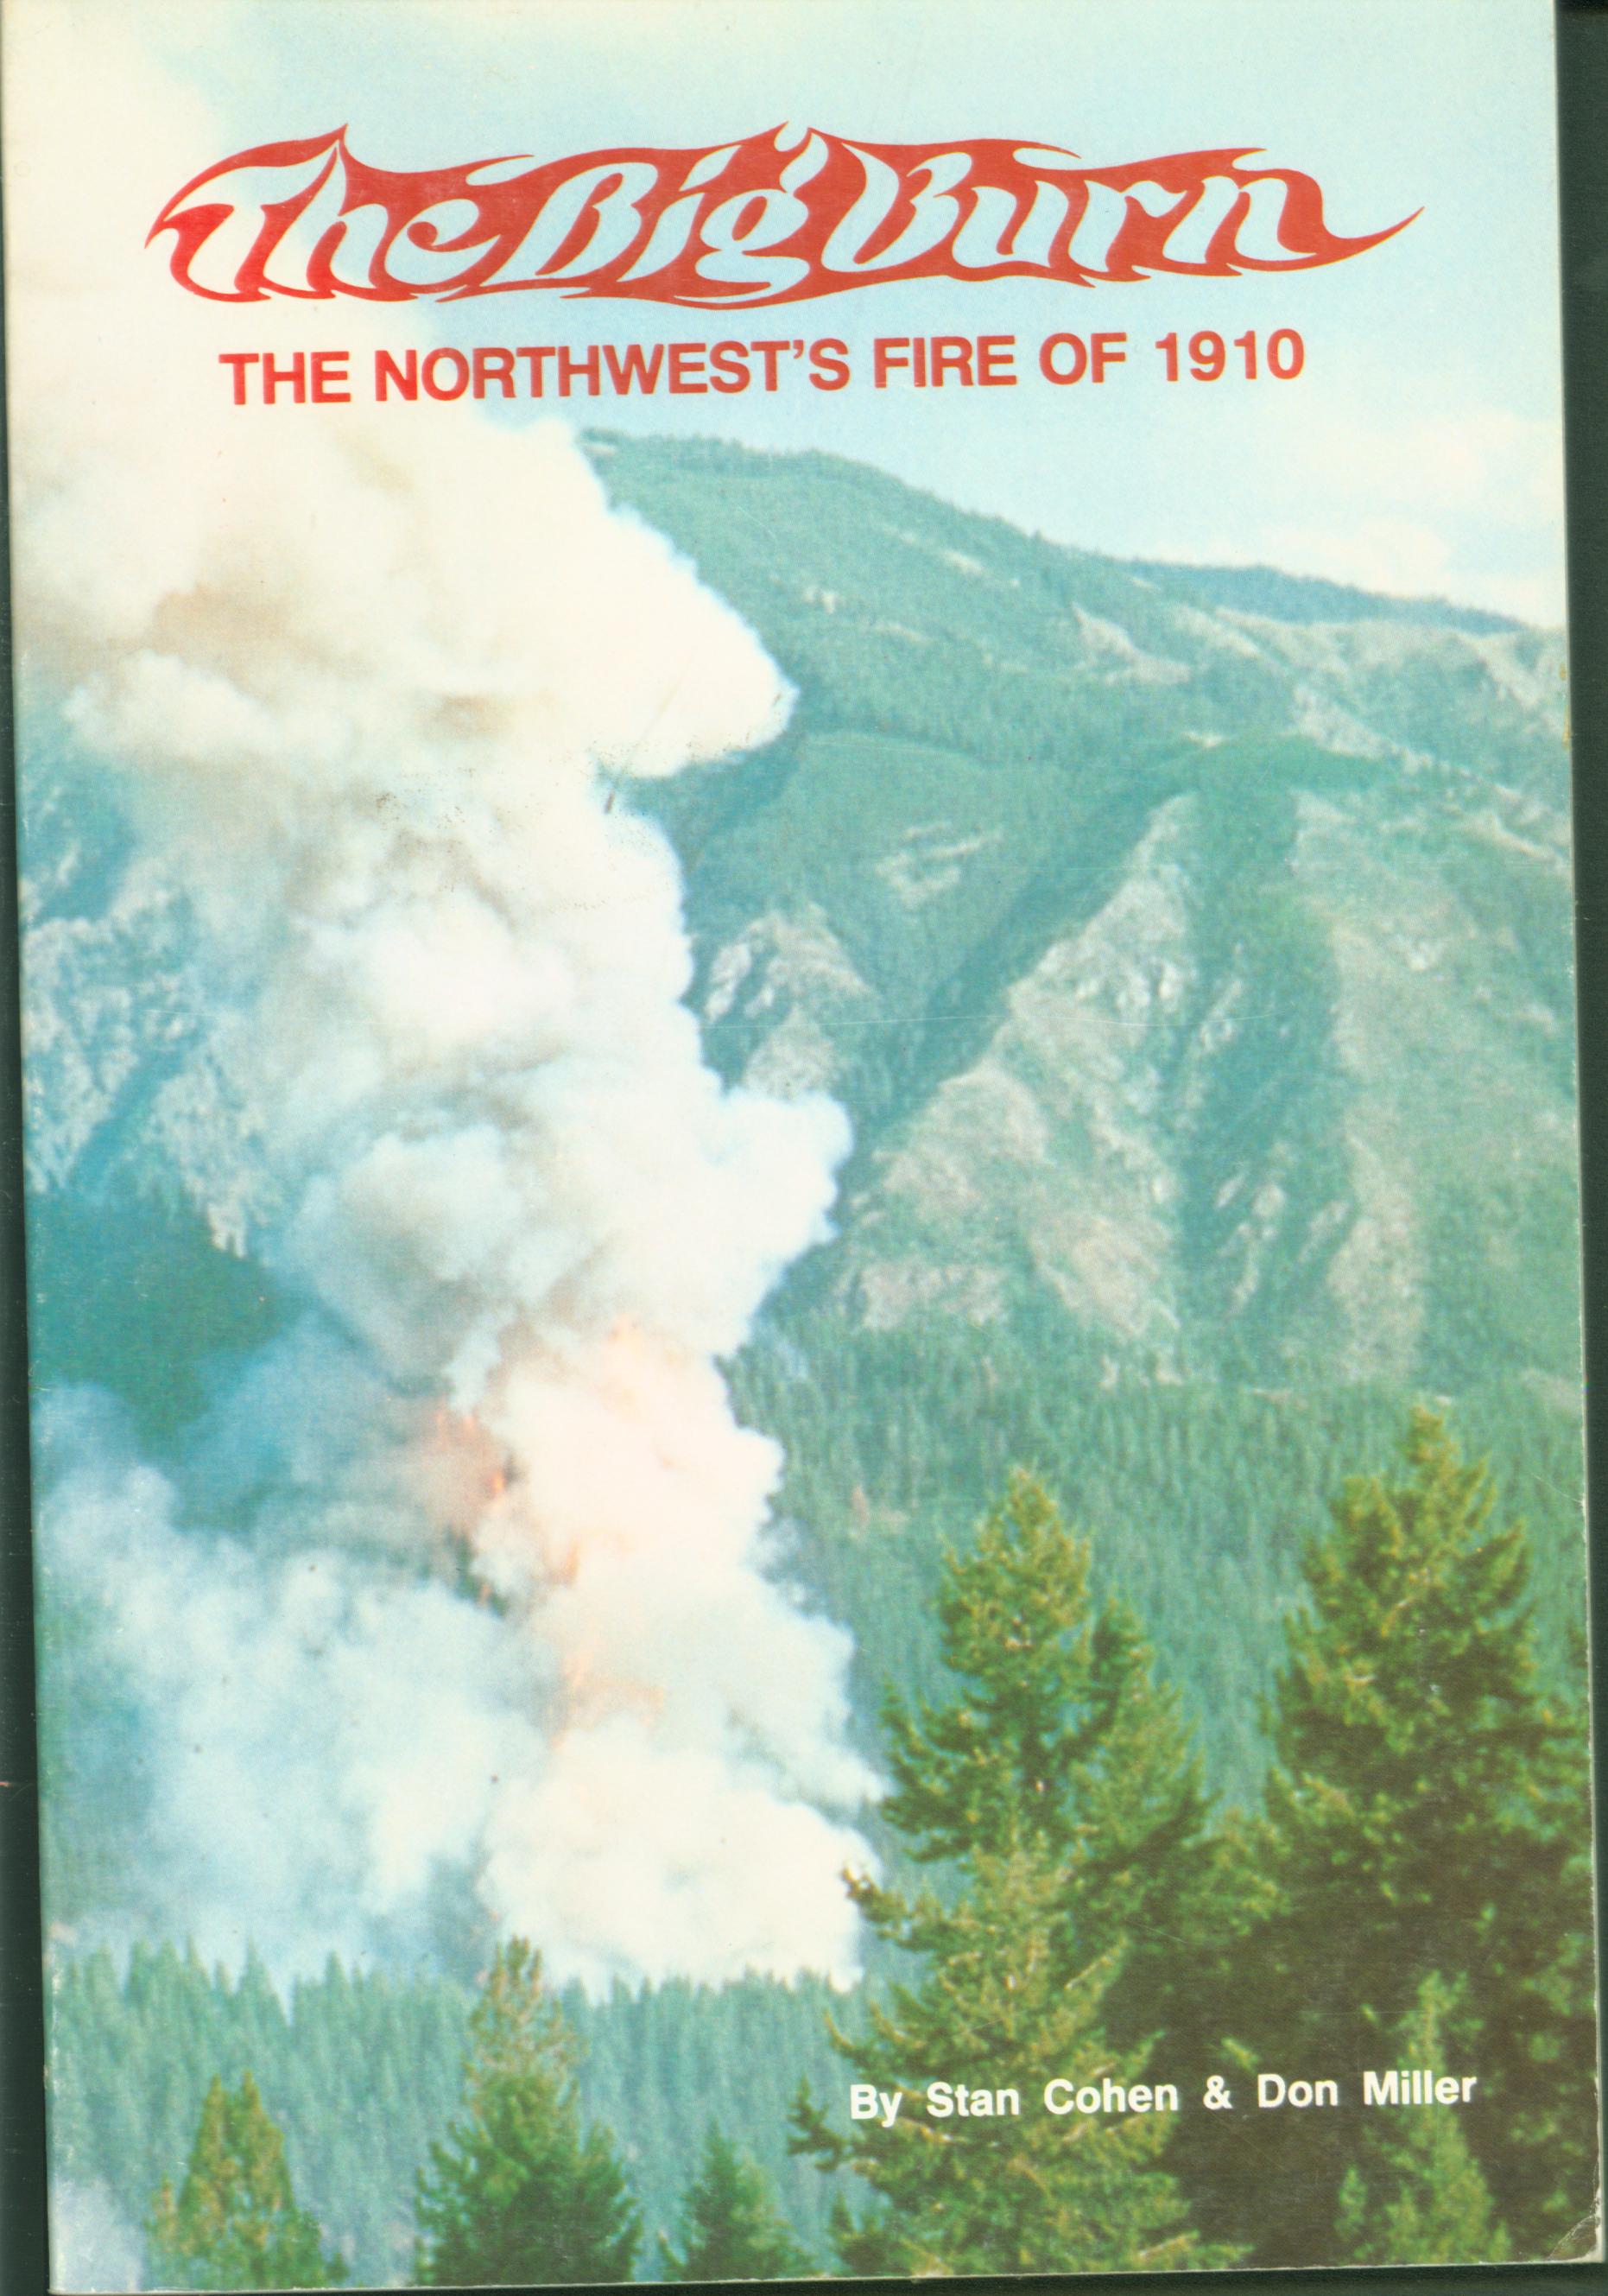 THE BIG BURN: the Northwest's fire of 1910. 